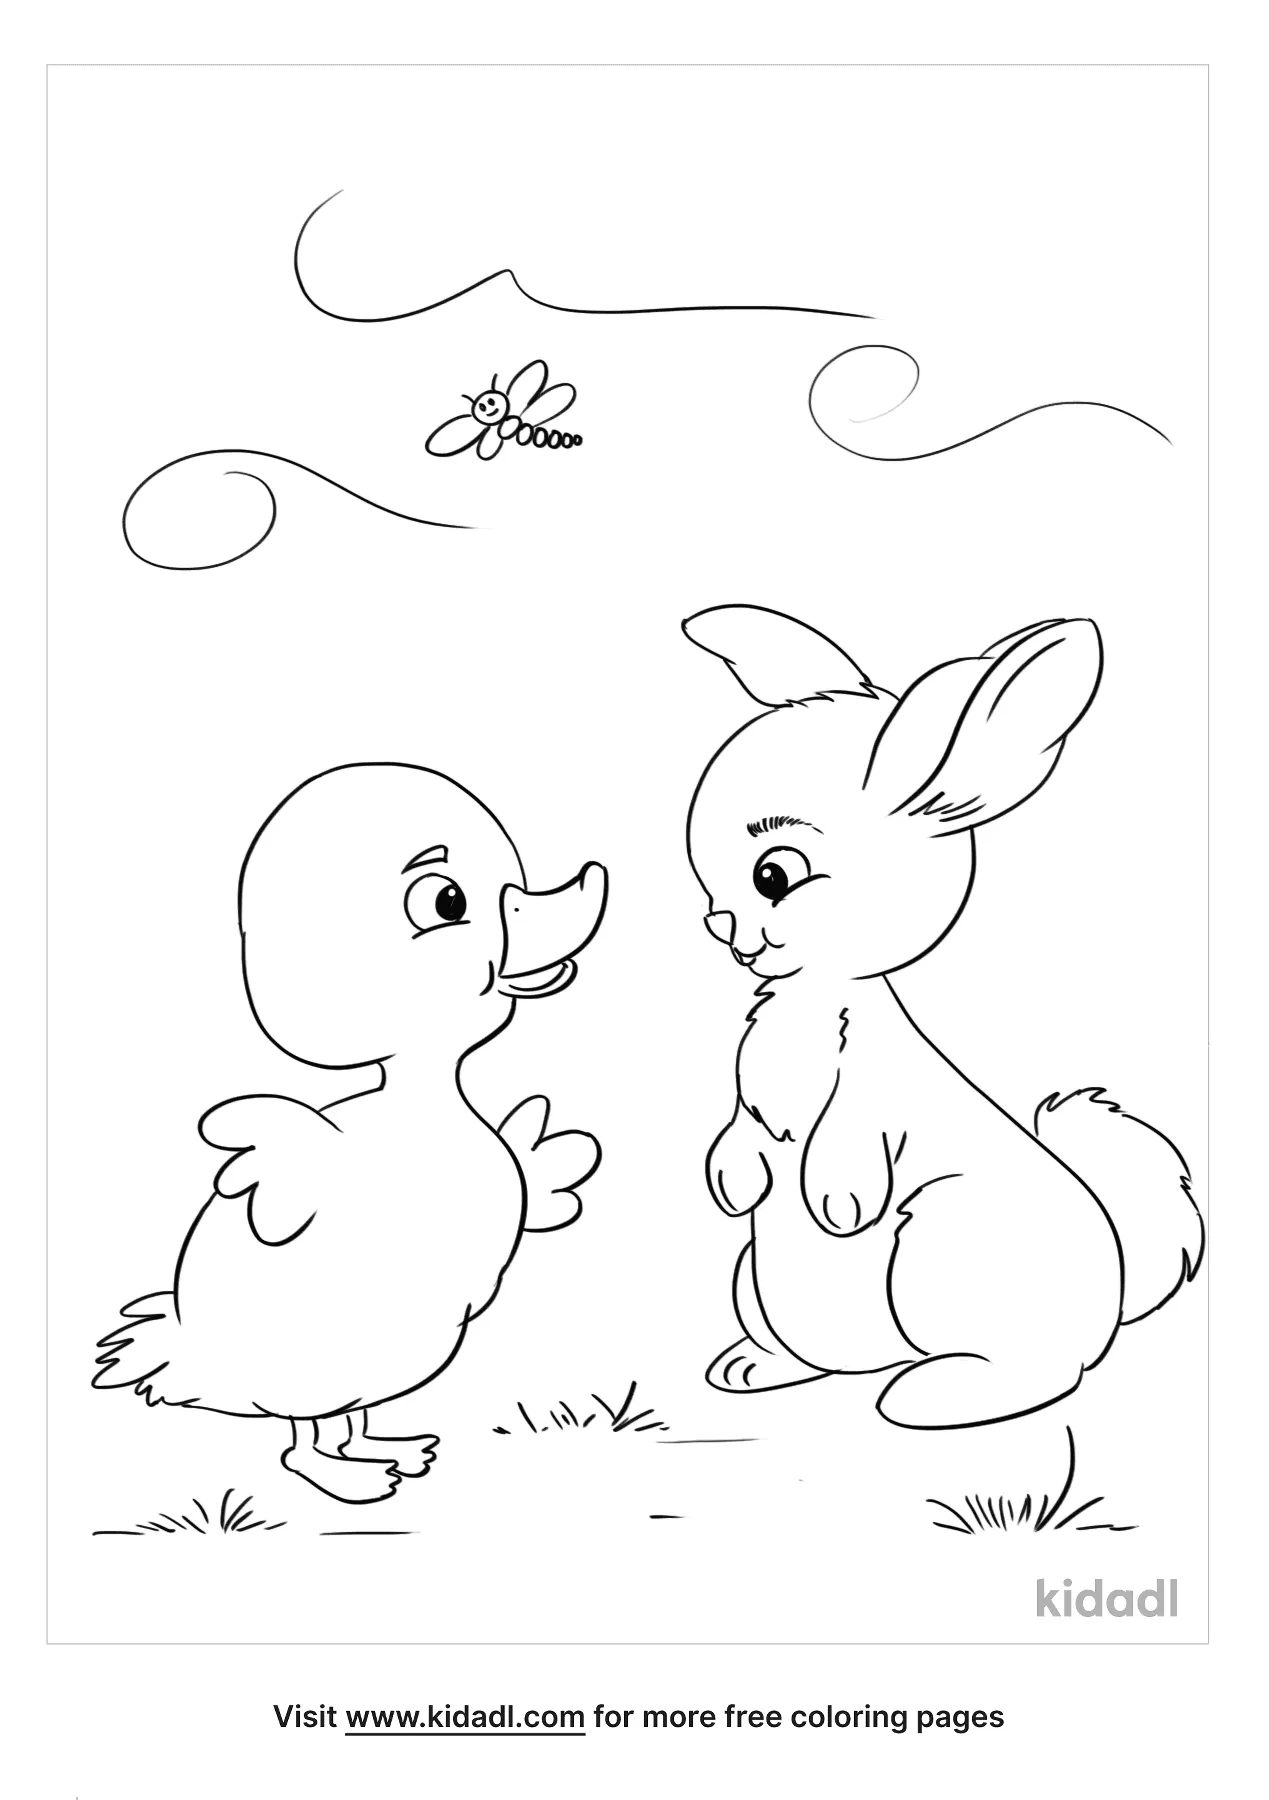 Bunny And Duck Coloring Page